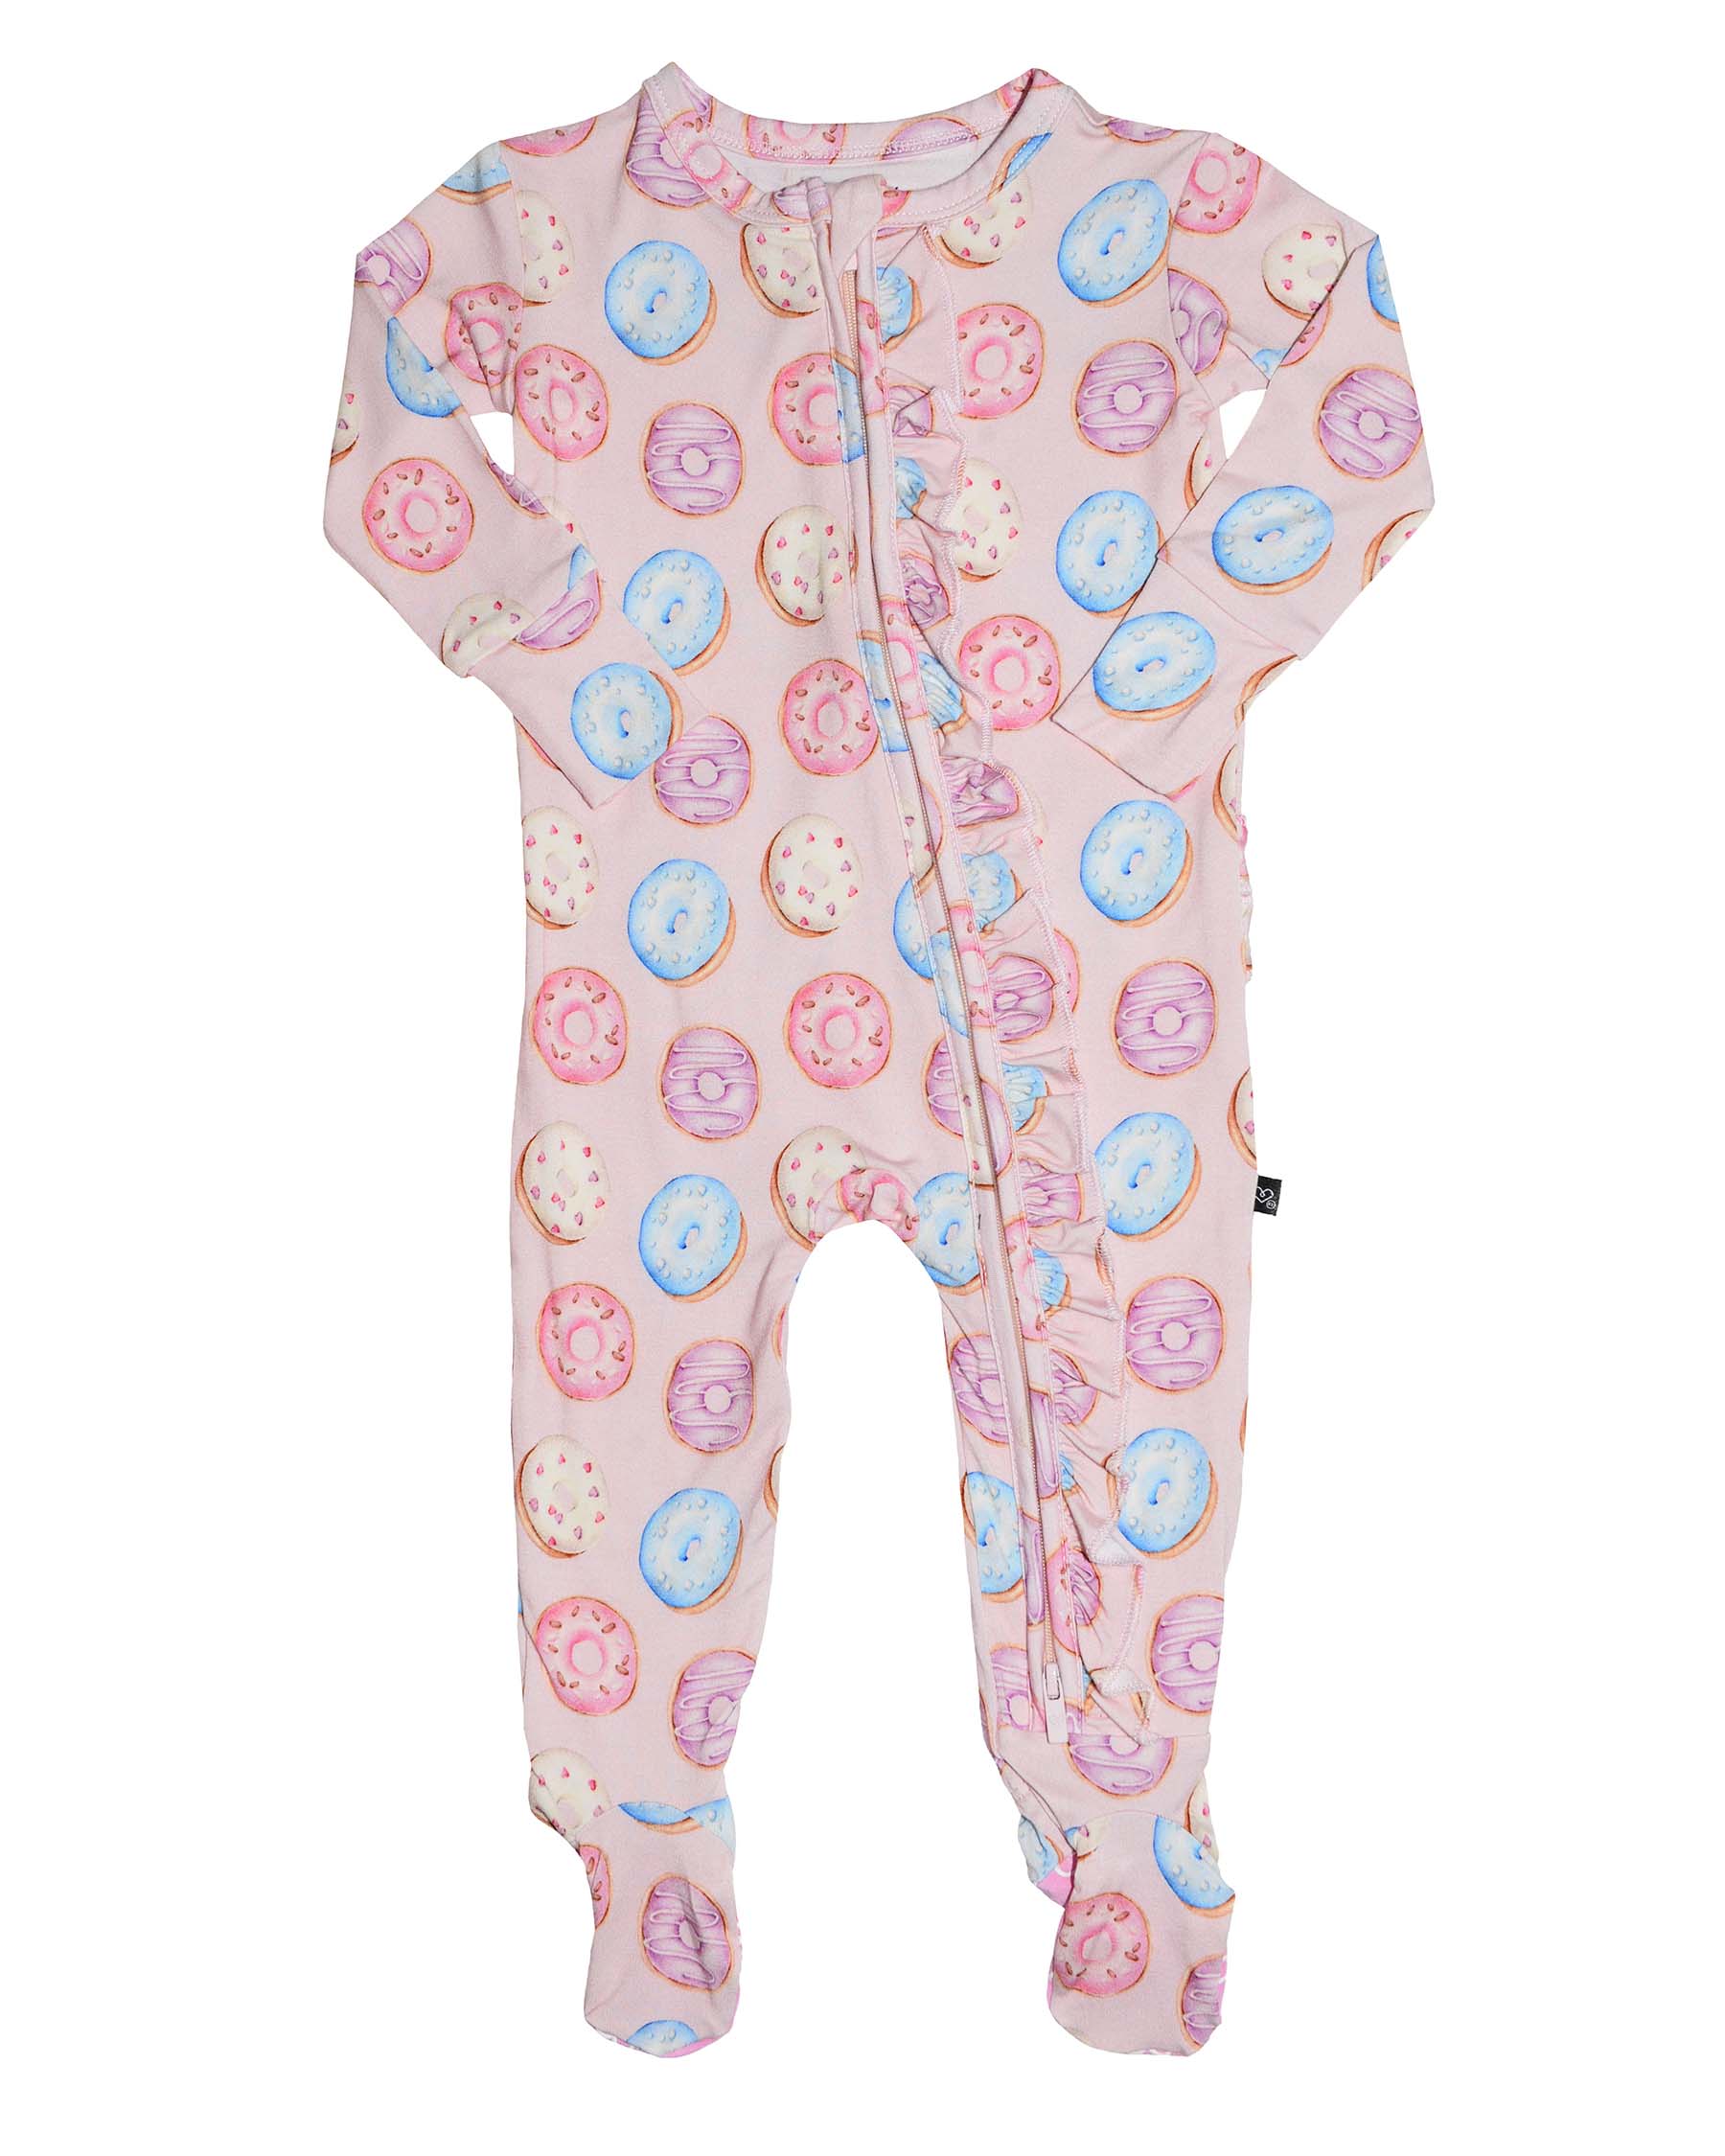 Lev baby Ruffled Zippered Footie